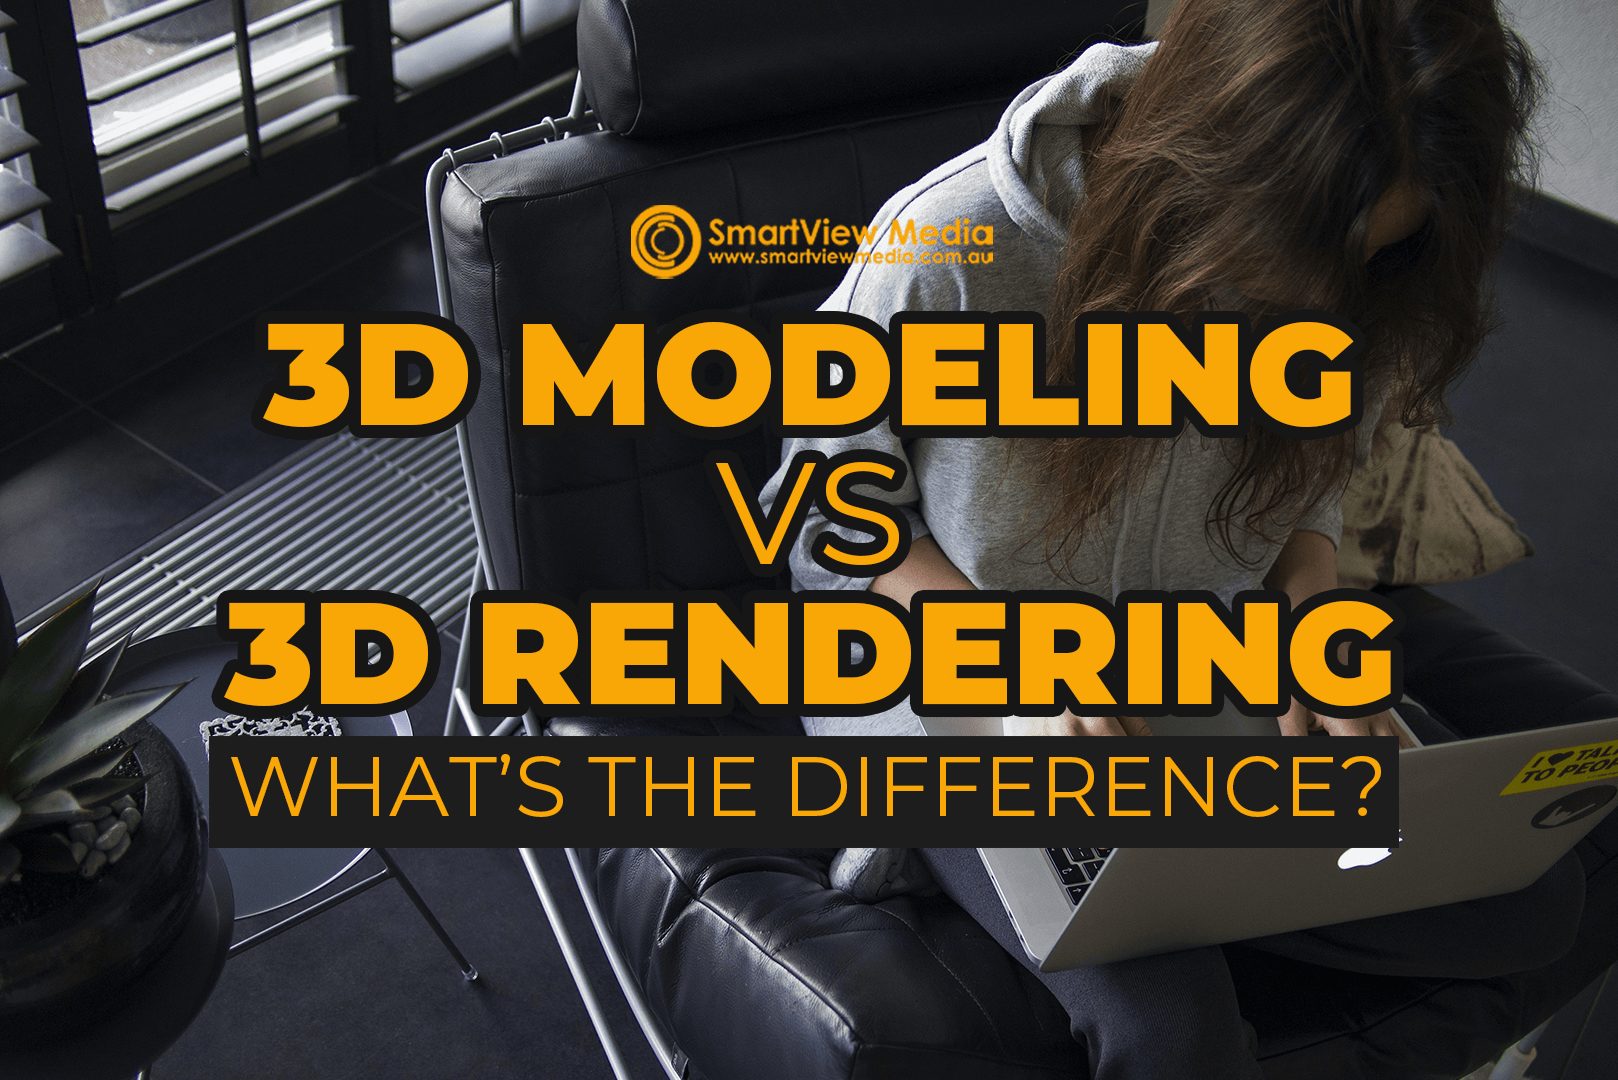 3D Modeling VS 3D Rendering What’s the Difference